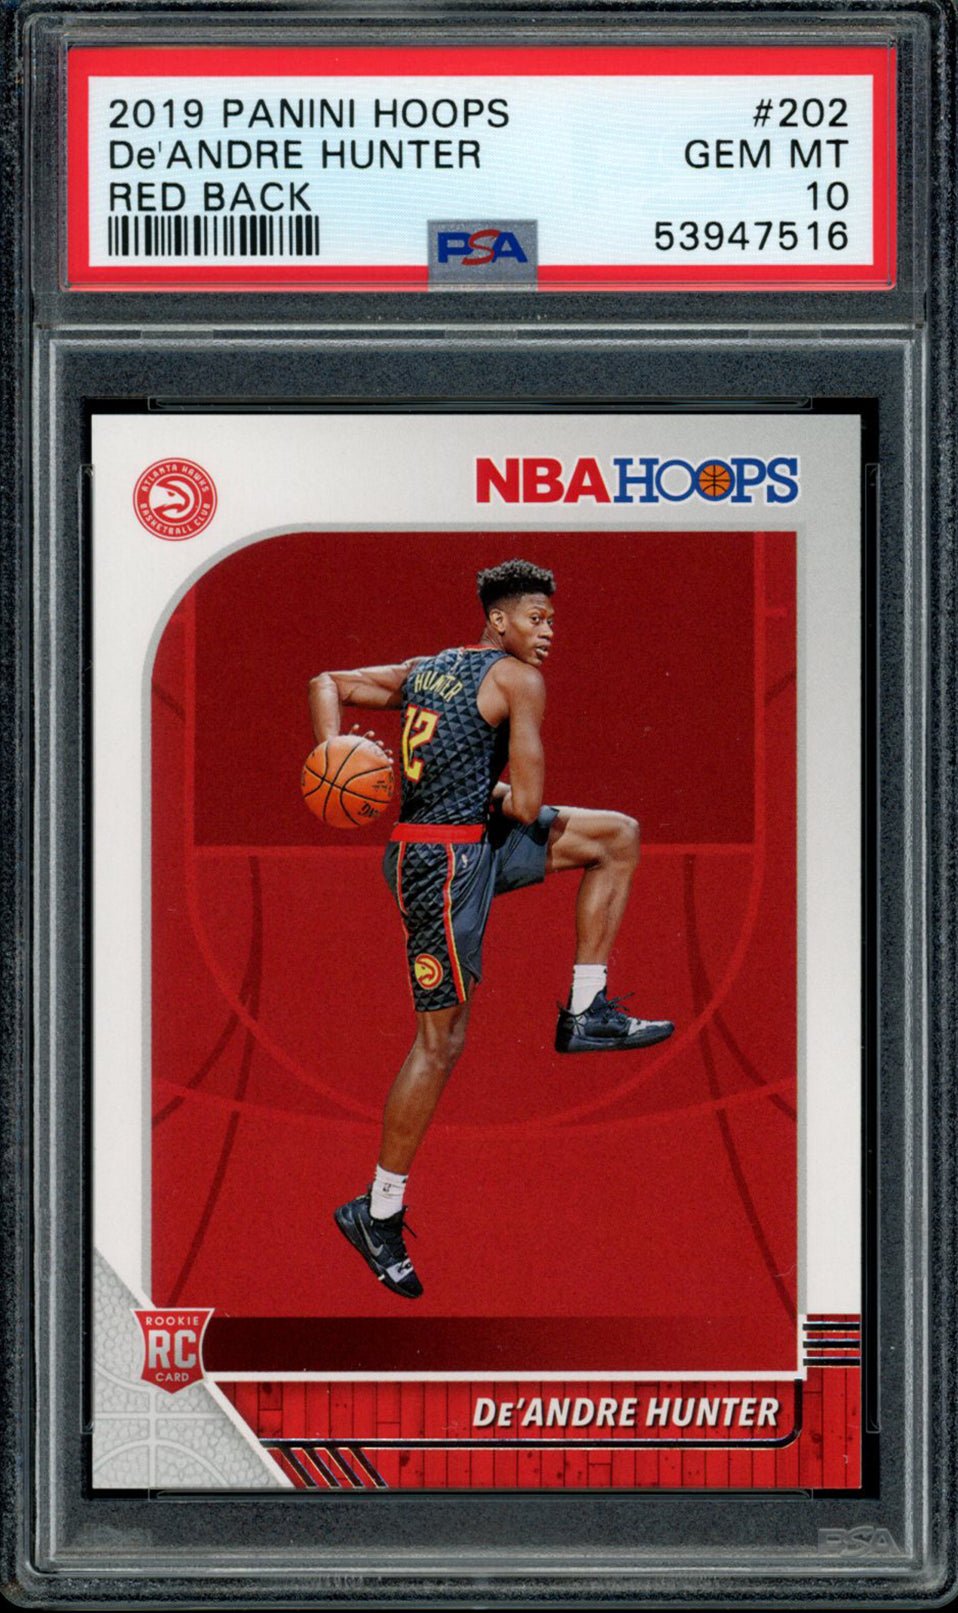 DE'ANDRE HUNTER PSA 10 2019-20 Panini Hoops RC Red Back #202 Low Pop Basketball Graded Cards Parallel RC - Hobby Gems